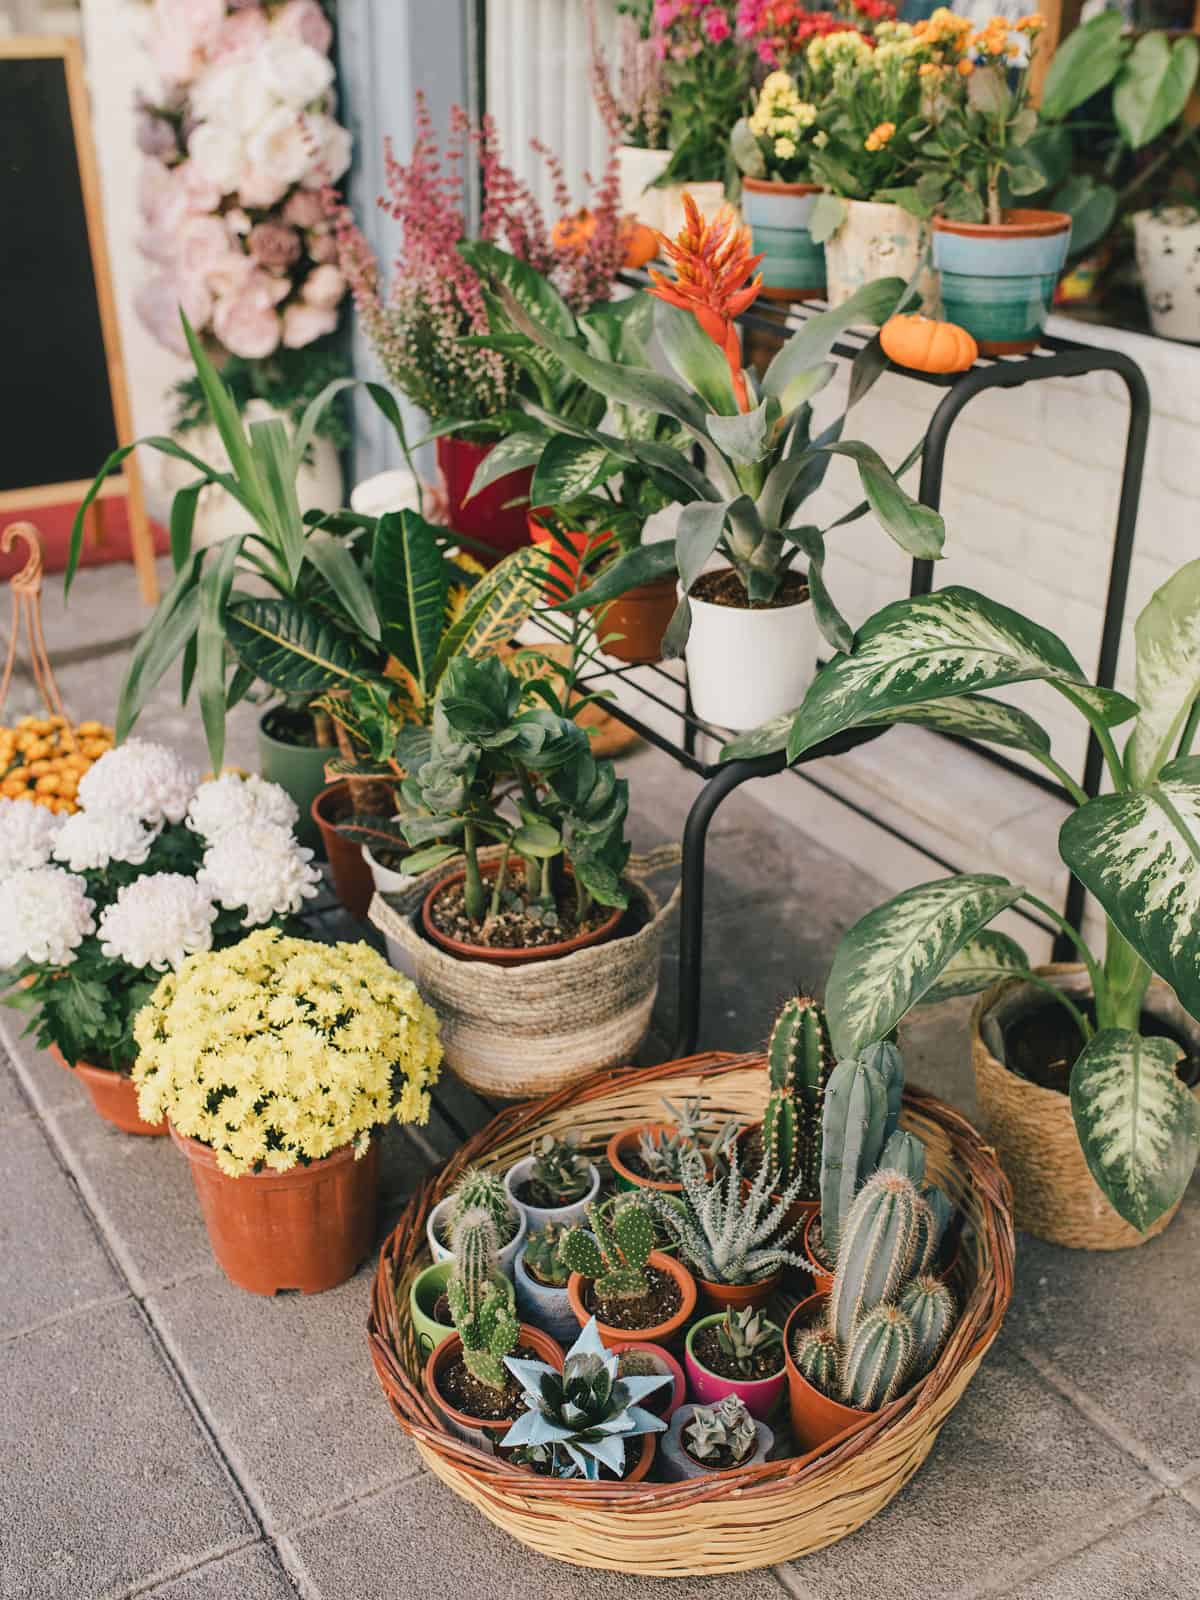 A basket full of small succulents next to a small garden rack full of plants